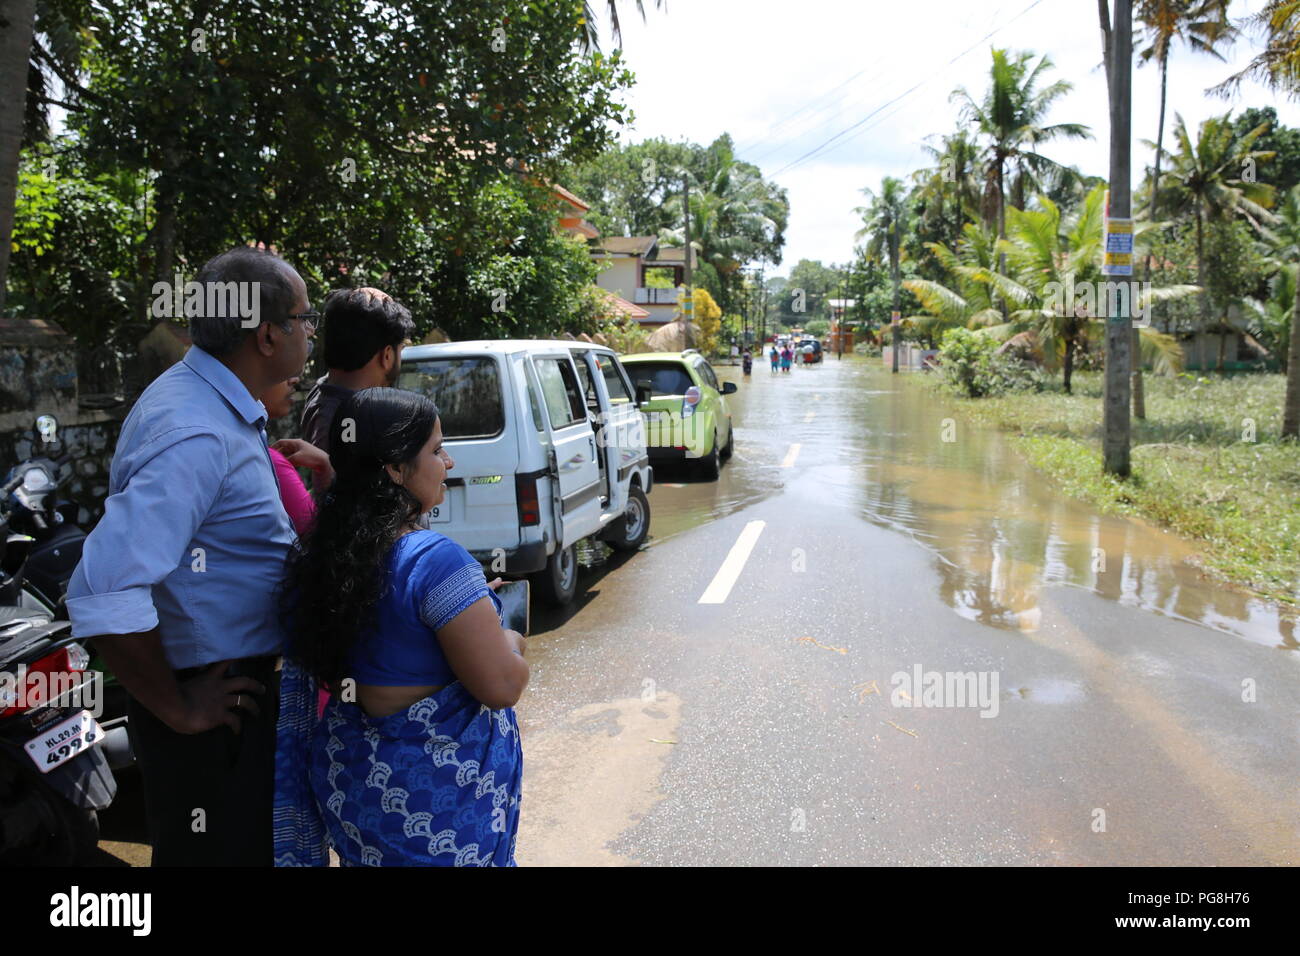 Kerala. 22nd Aug, 2018. A street is seen flooded in India's southernmost flood-hit Kerala state, Aug. 22, 2018. According to media reports, the death toll in the devastating floods has reached 370. Credit: Zhao Xu/Xinhua/Alamy Live News Stock Photo